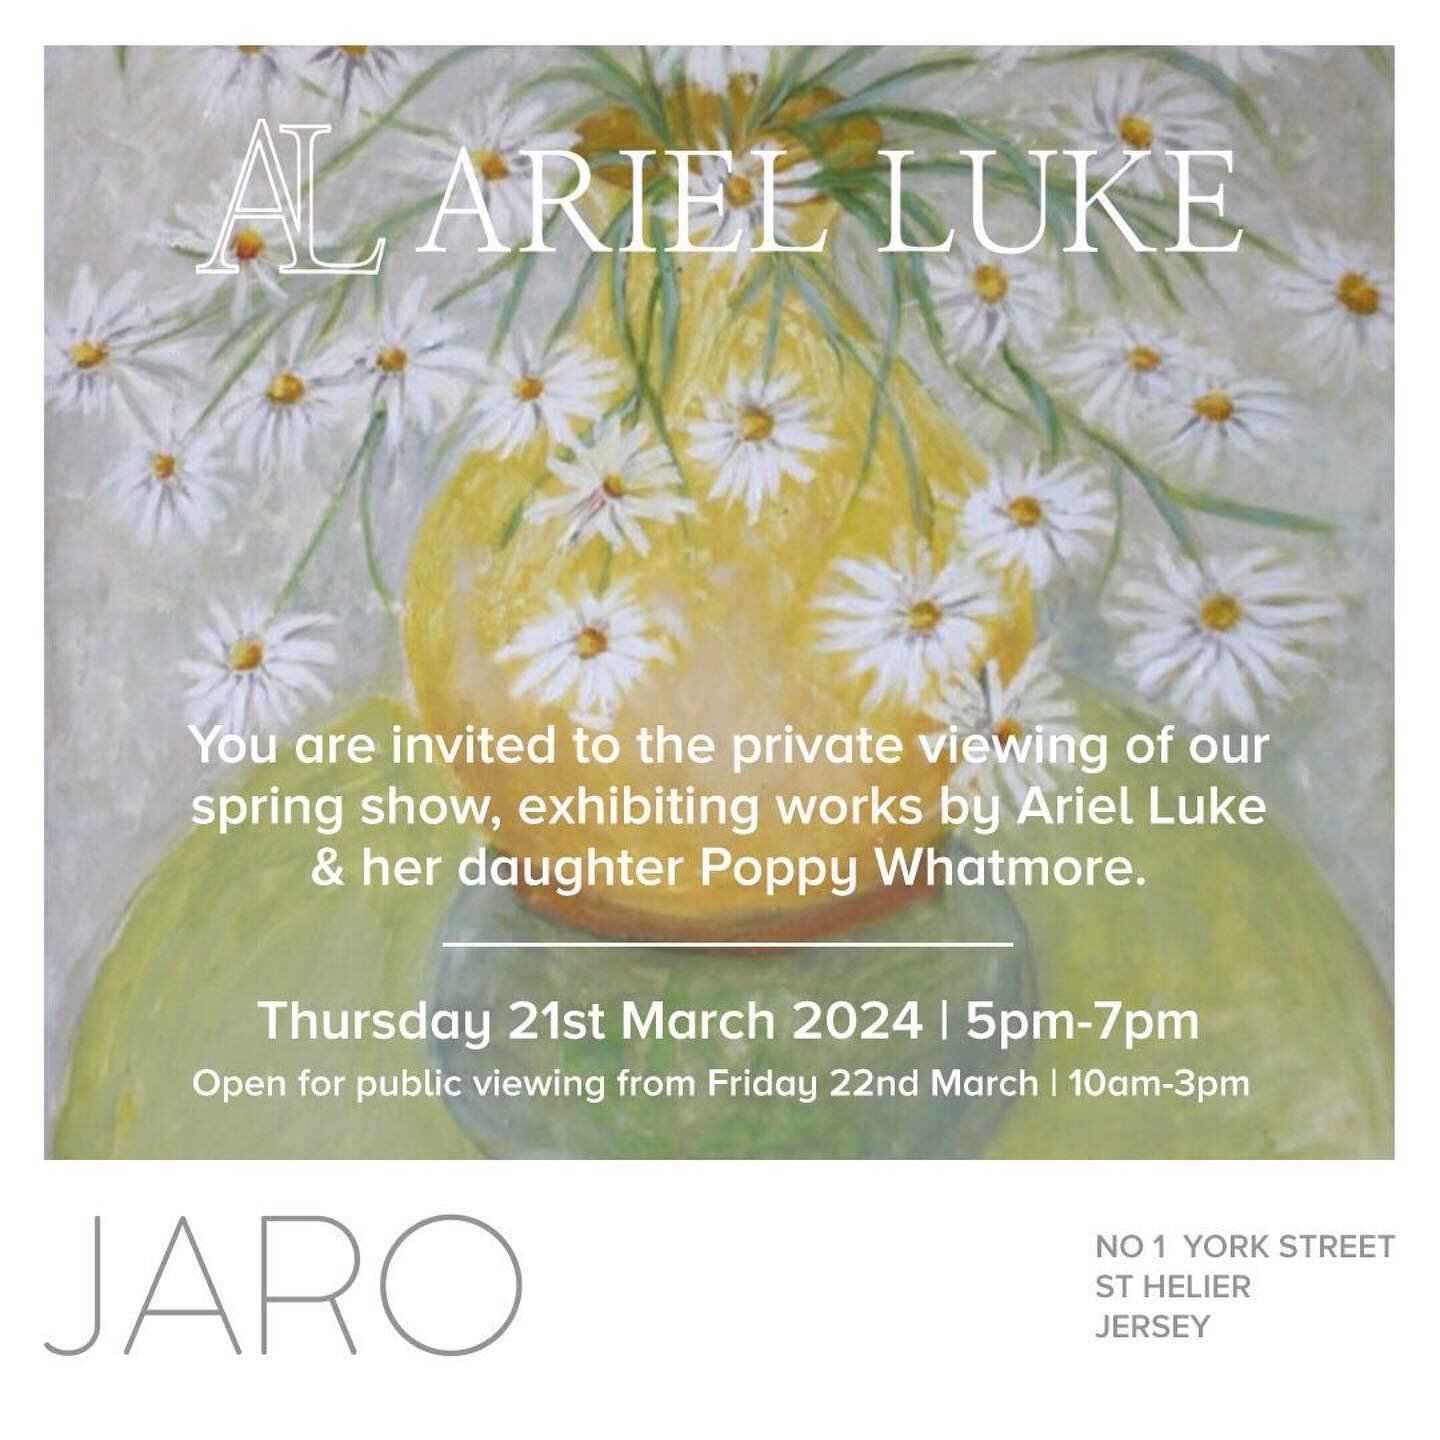 NEW EXHIBITION OPENING THIS THURSDAY 21st MARCH 5PM-7PM

Joinn us tomorrow and view the works now on display in the gallery. 

Introducing Ariel Luke and her daughter Poppy Whatmore. 

We are thrilled to present our Spring Show, celebrating the beaut